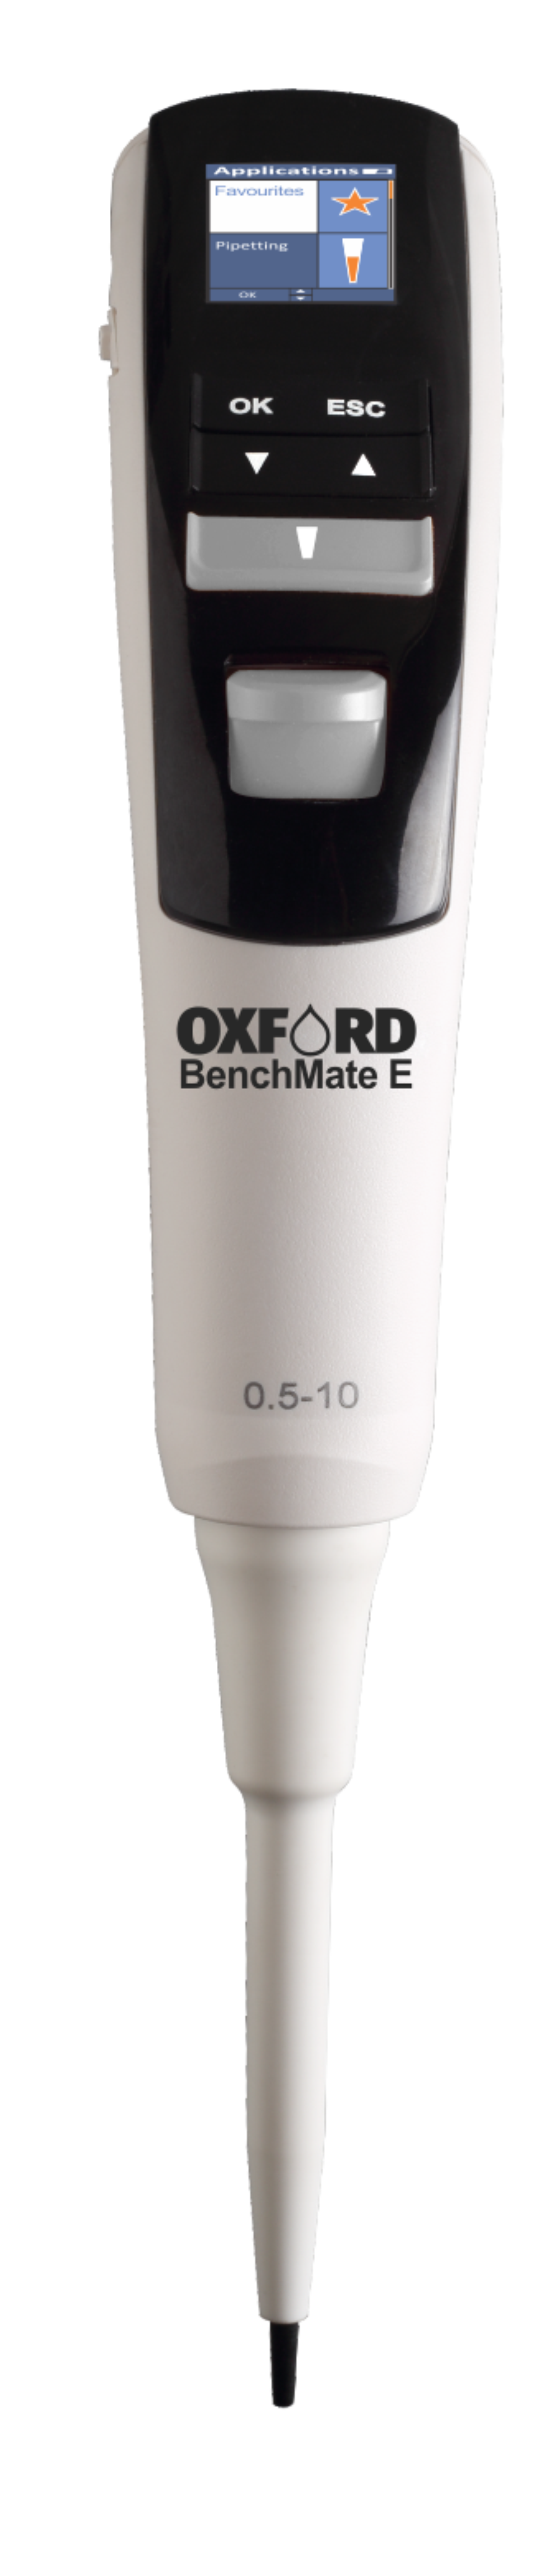 Oxford BenchMate Electronic Pipette 0.5-10 µl